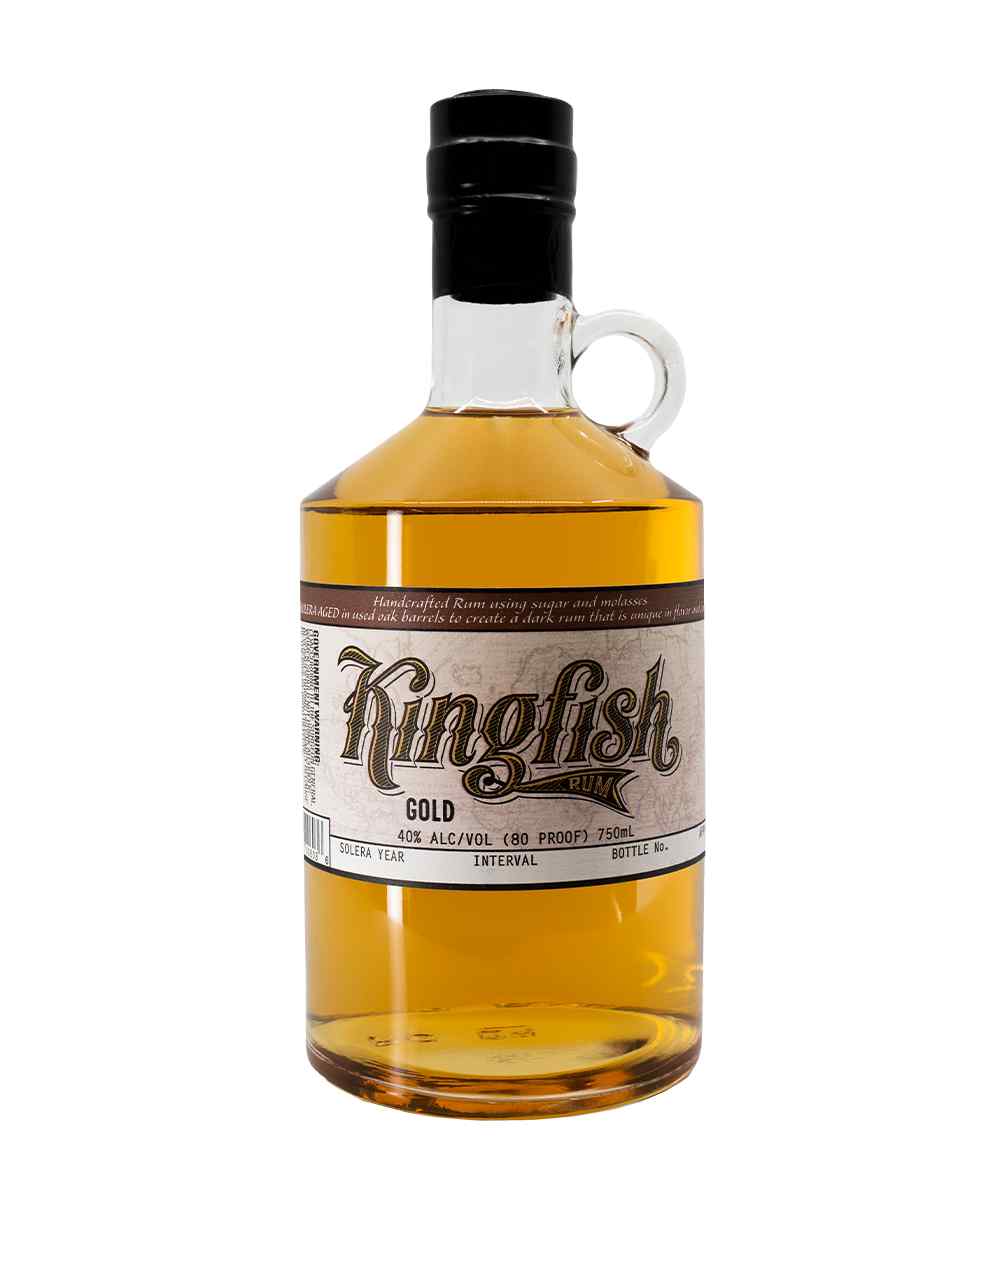 New England Sweetwater Kingfish Gold Rum